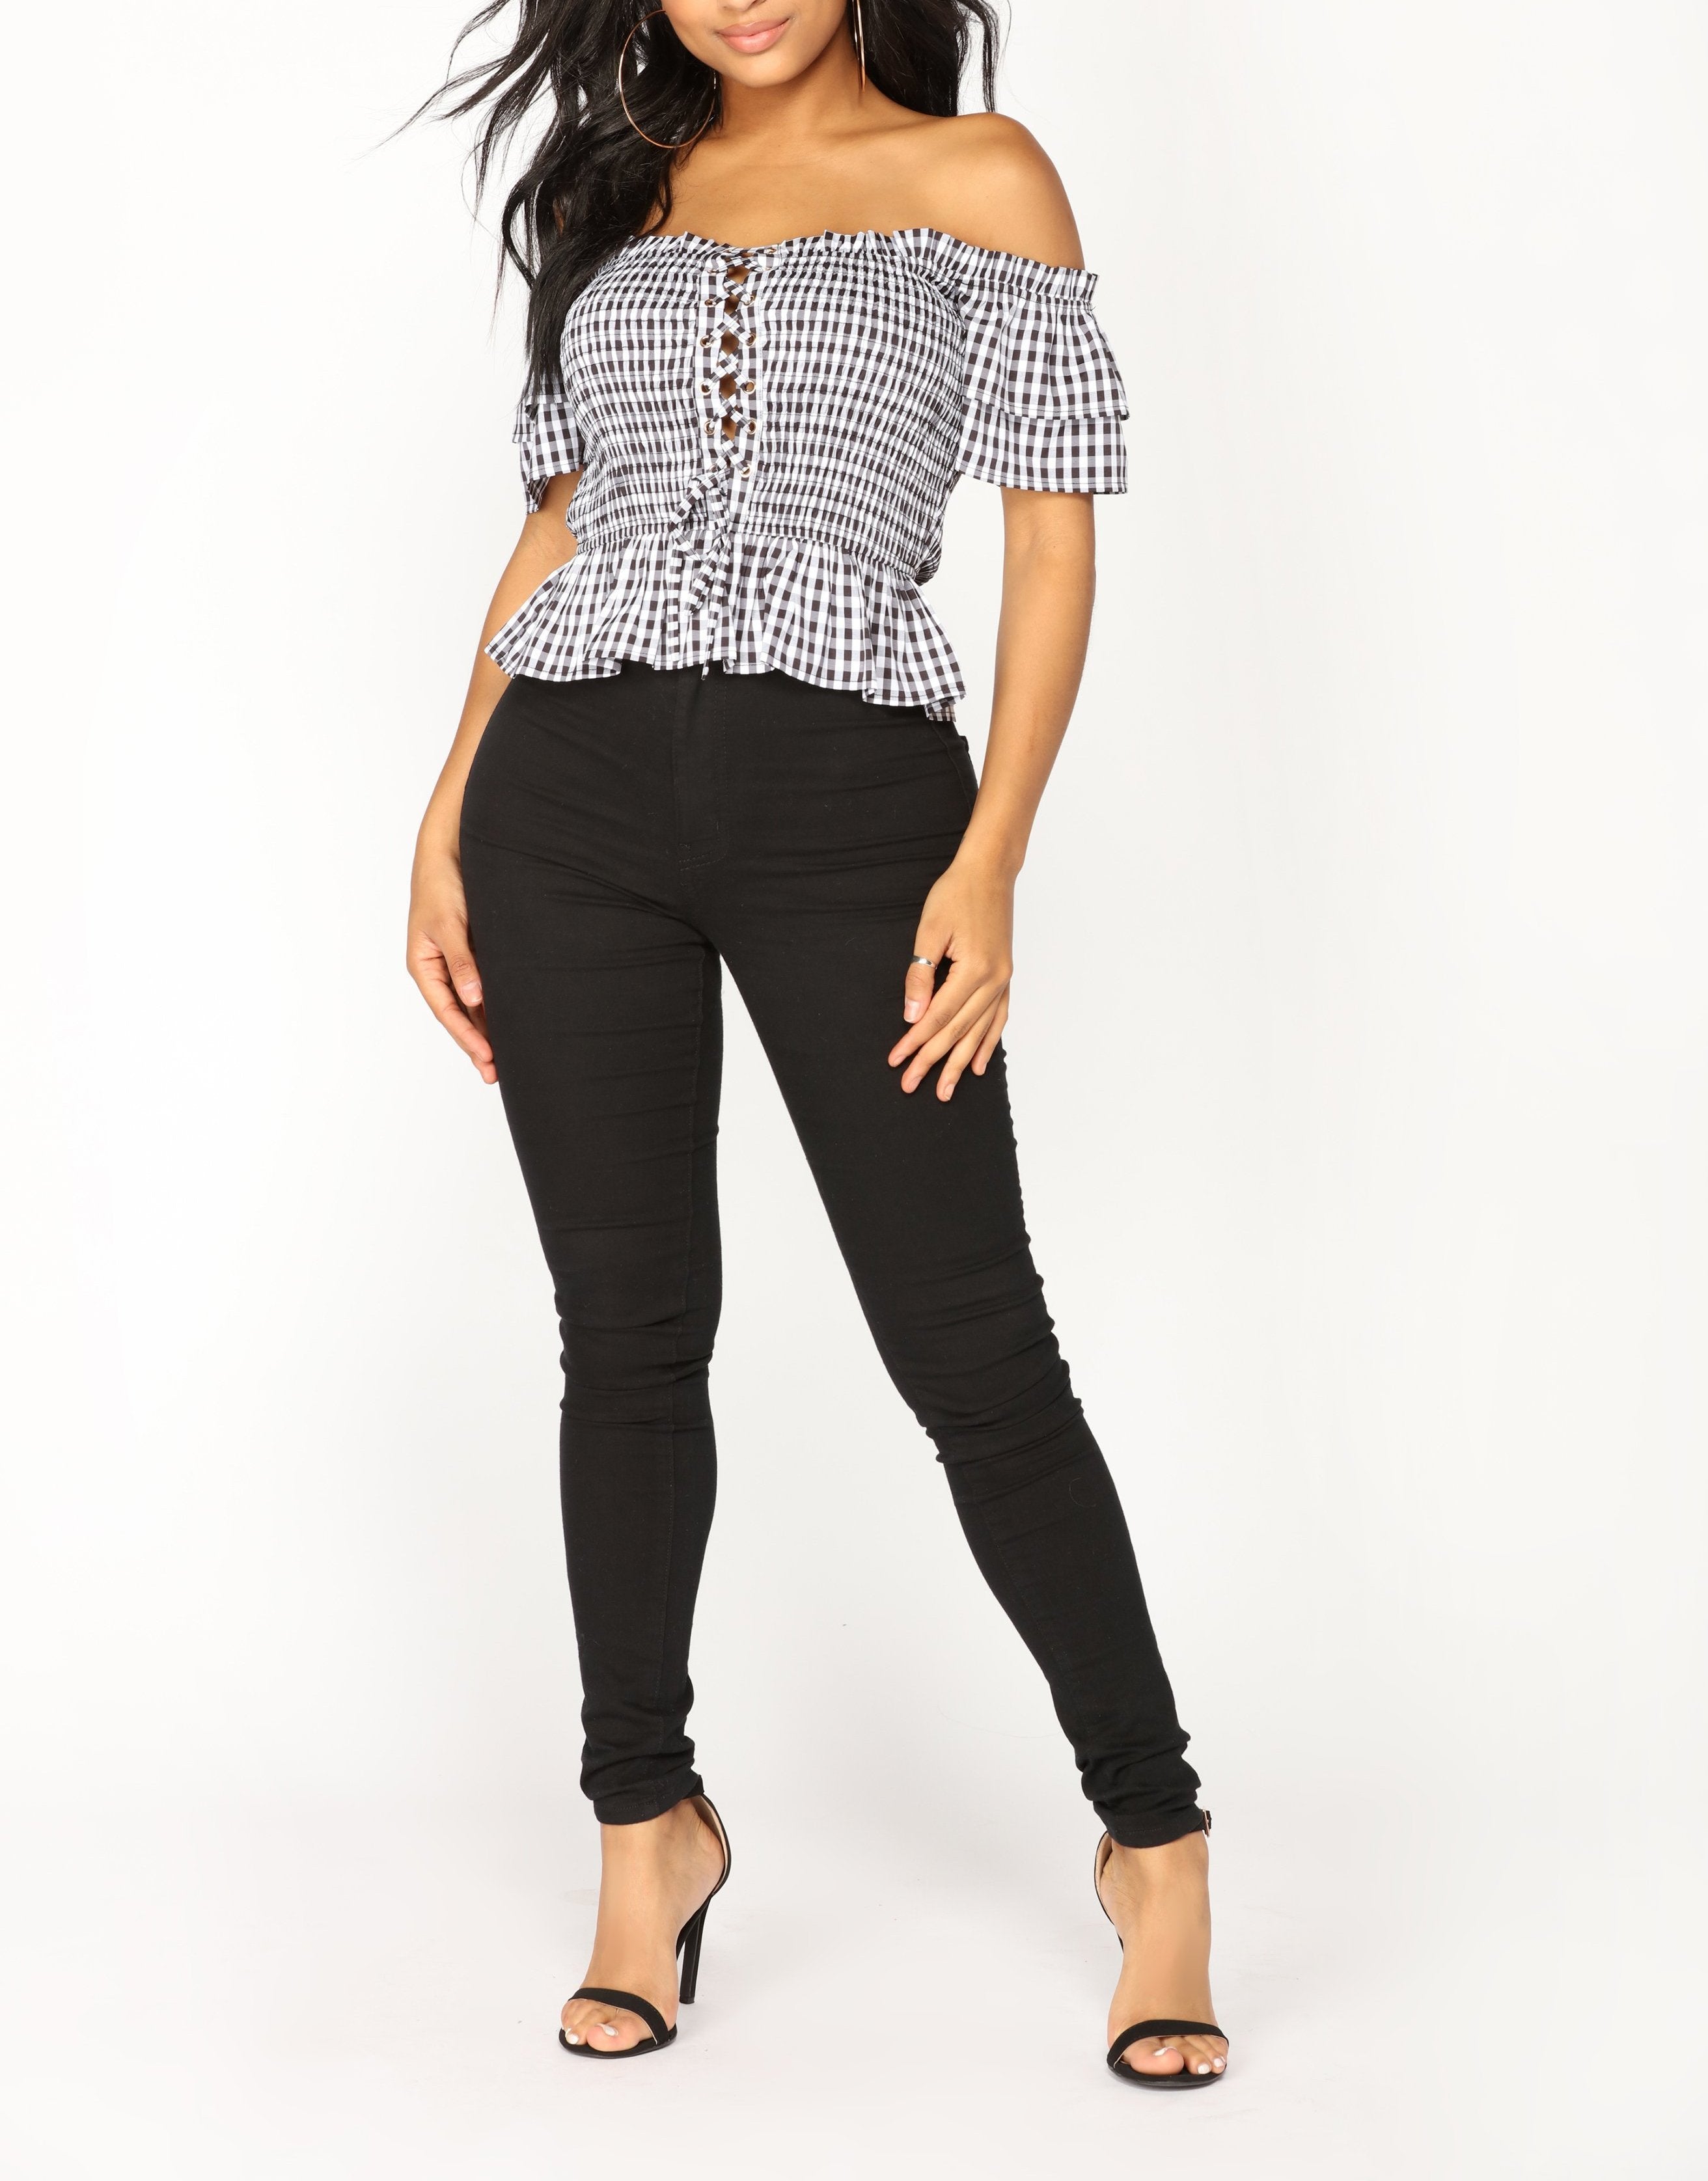 Off Shoulder Lace Up Gingham Top in Black and White